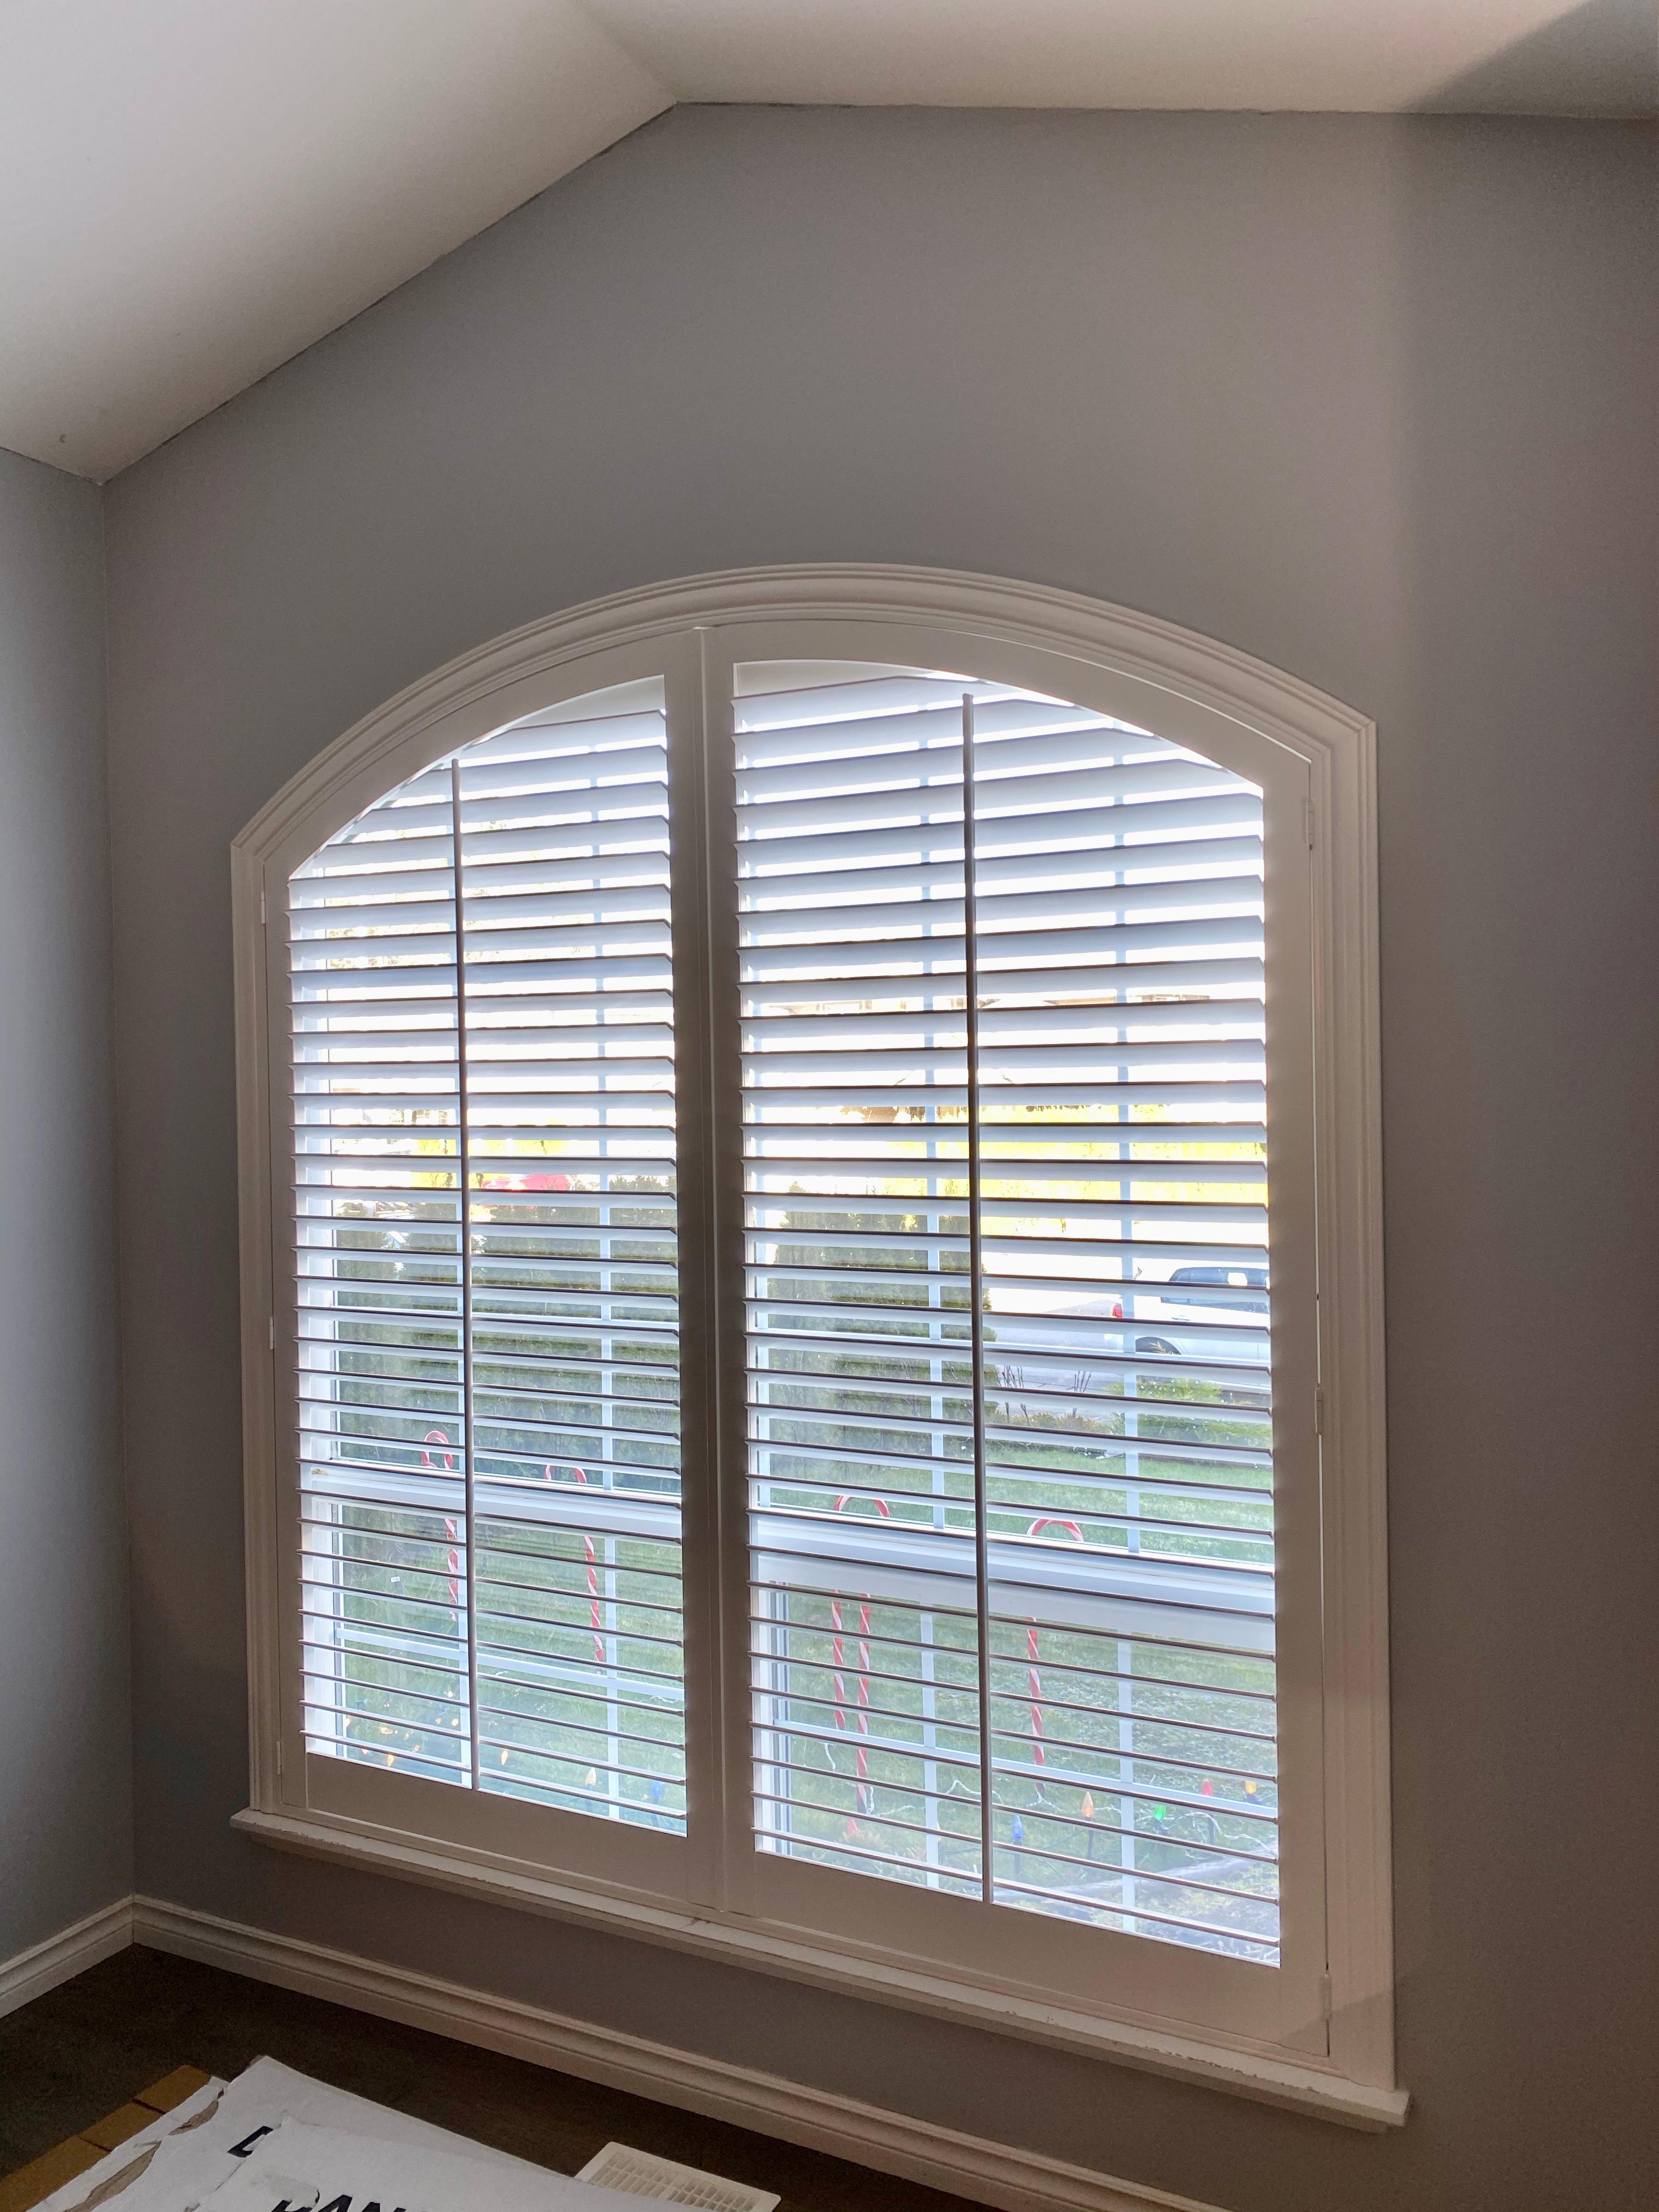 Real Wood Shutters Budget Blinds of Chilliwack, Hope and Harrison Chilliwack (604)824-0375